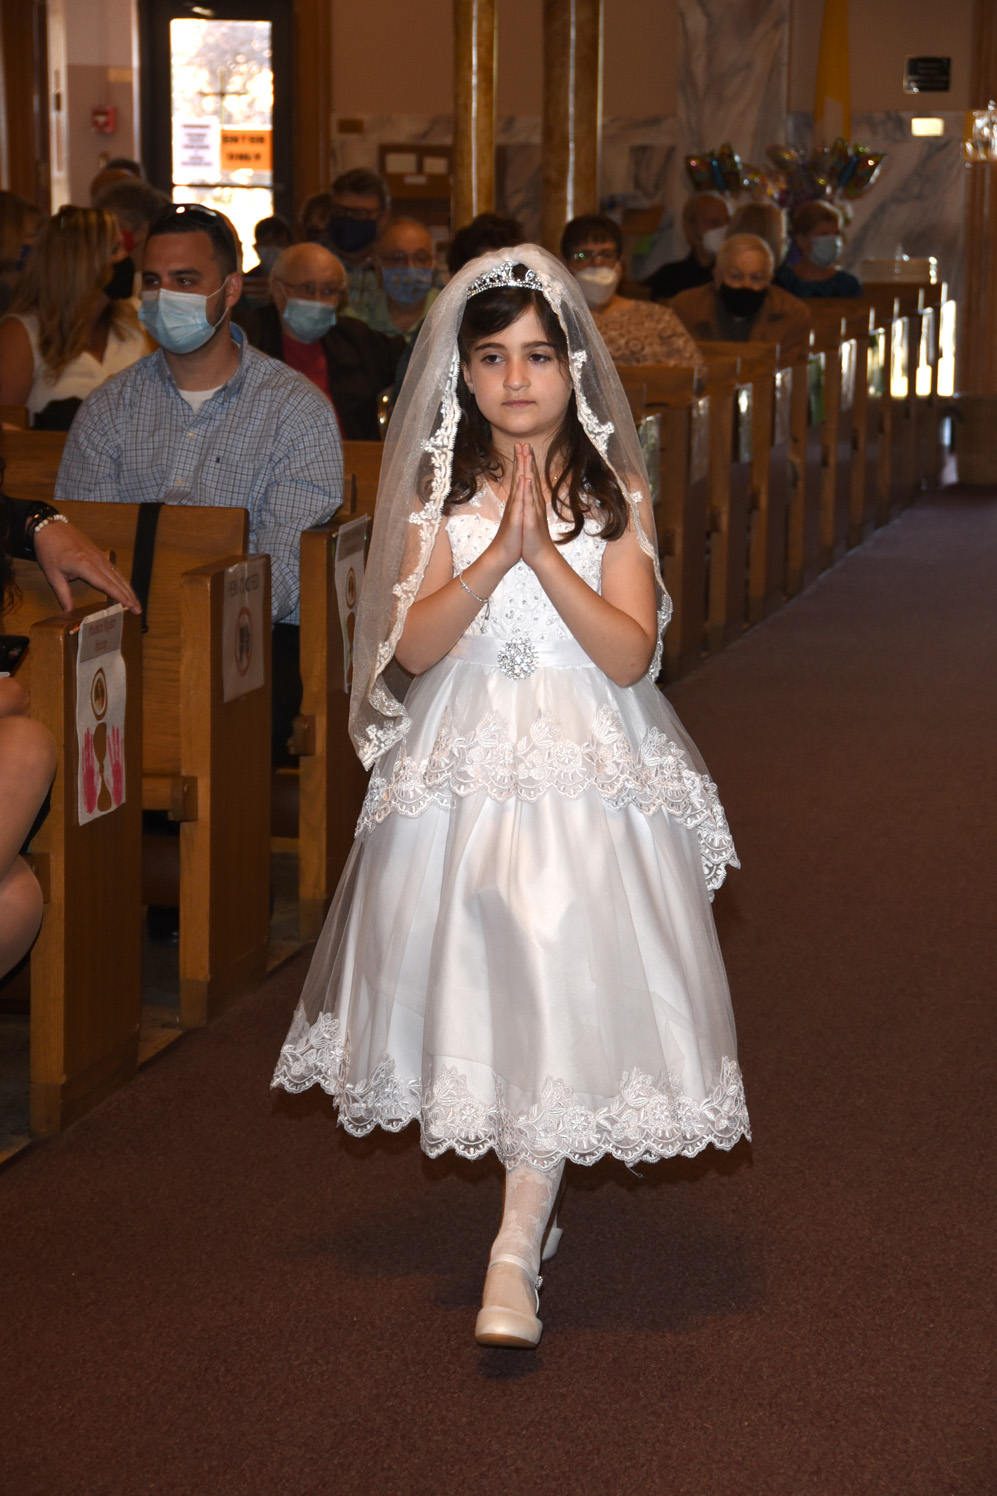 FIRST-COMMUNION-MAY-16-2021-49